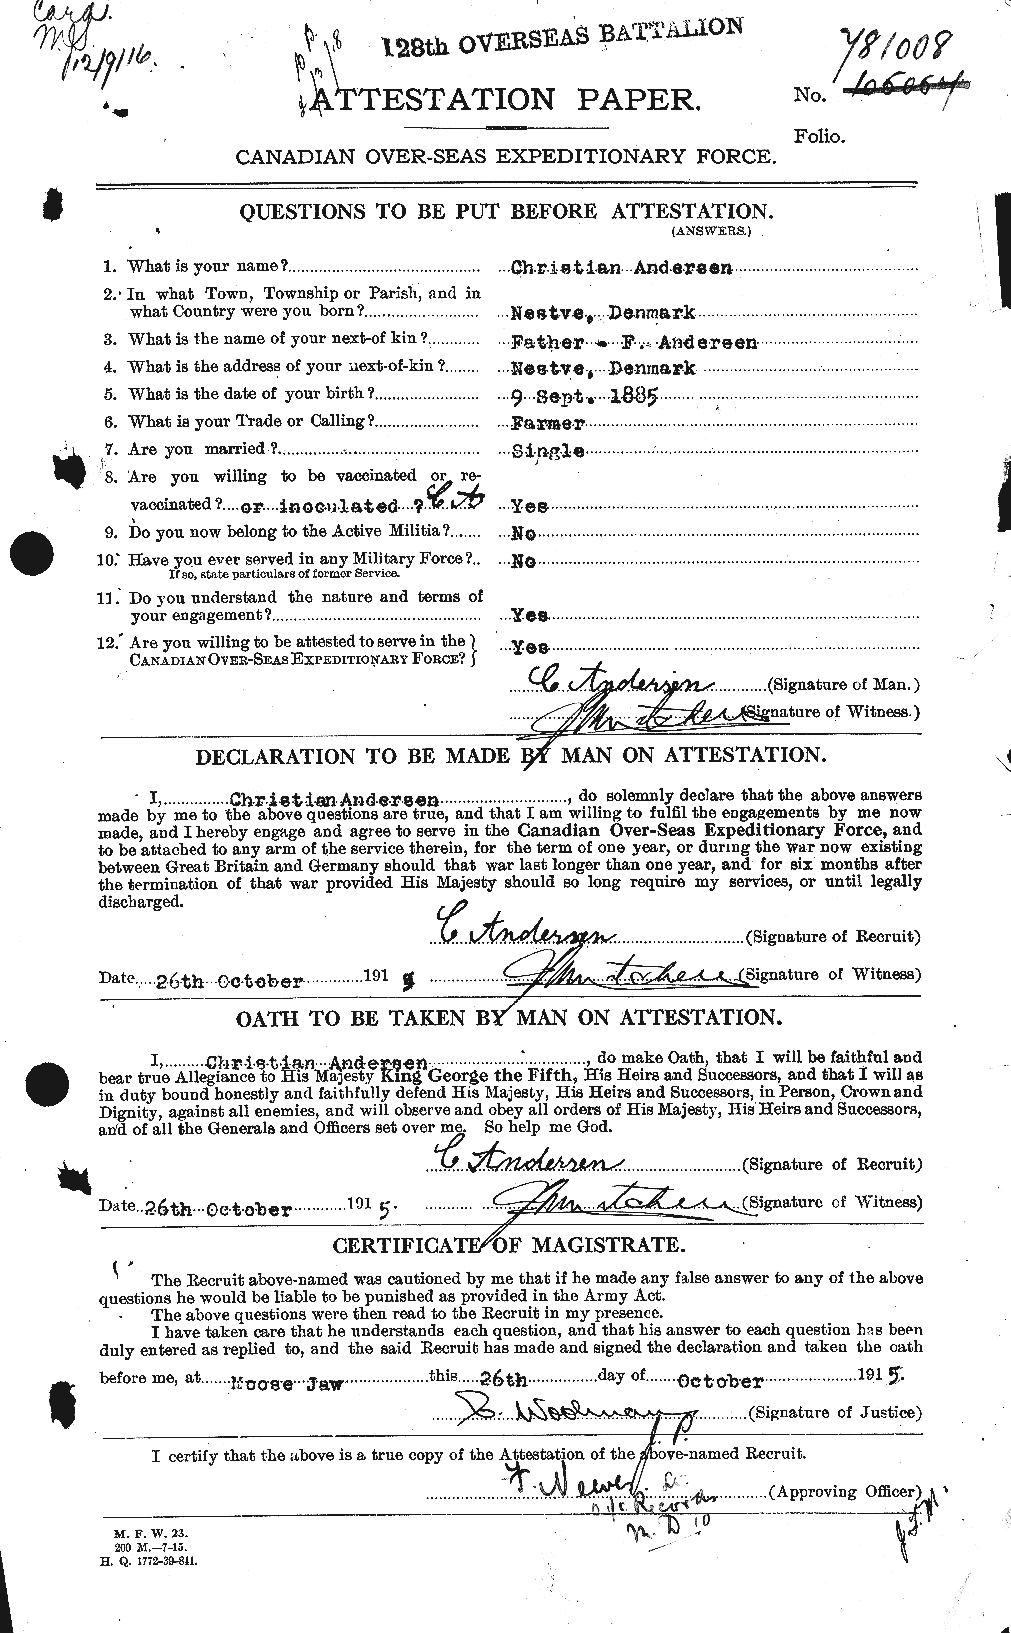 Personnel Records of the First World War - CEF 209591a